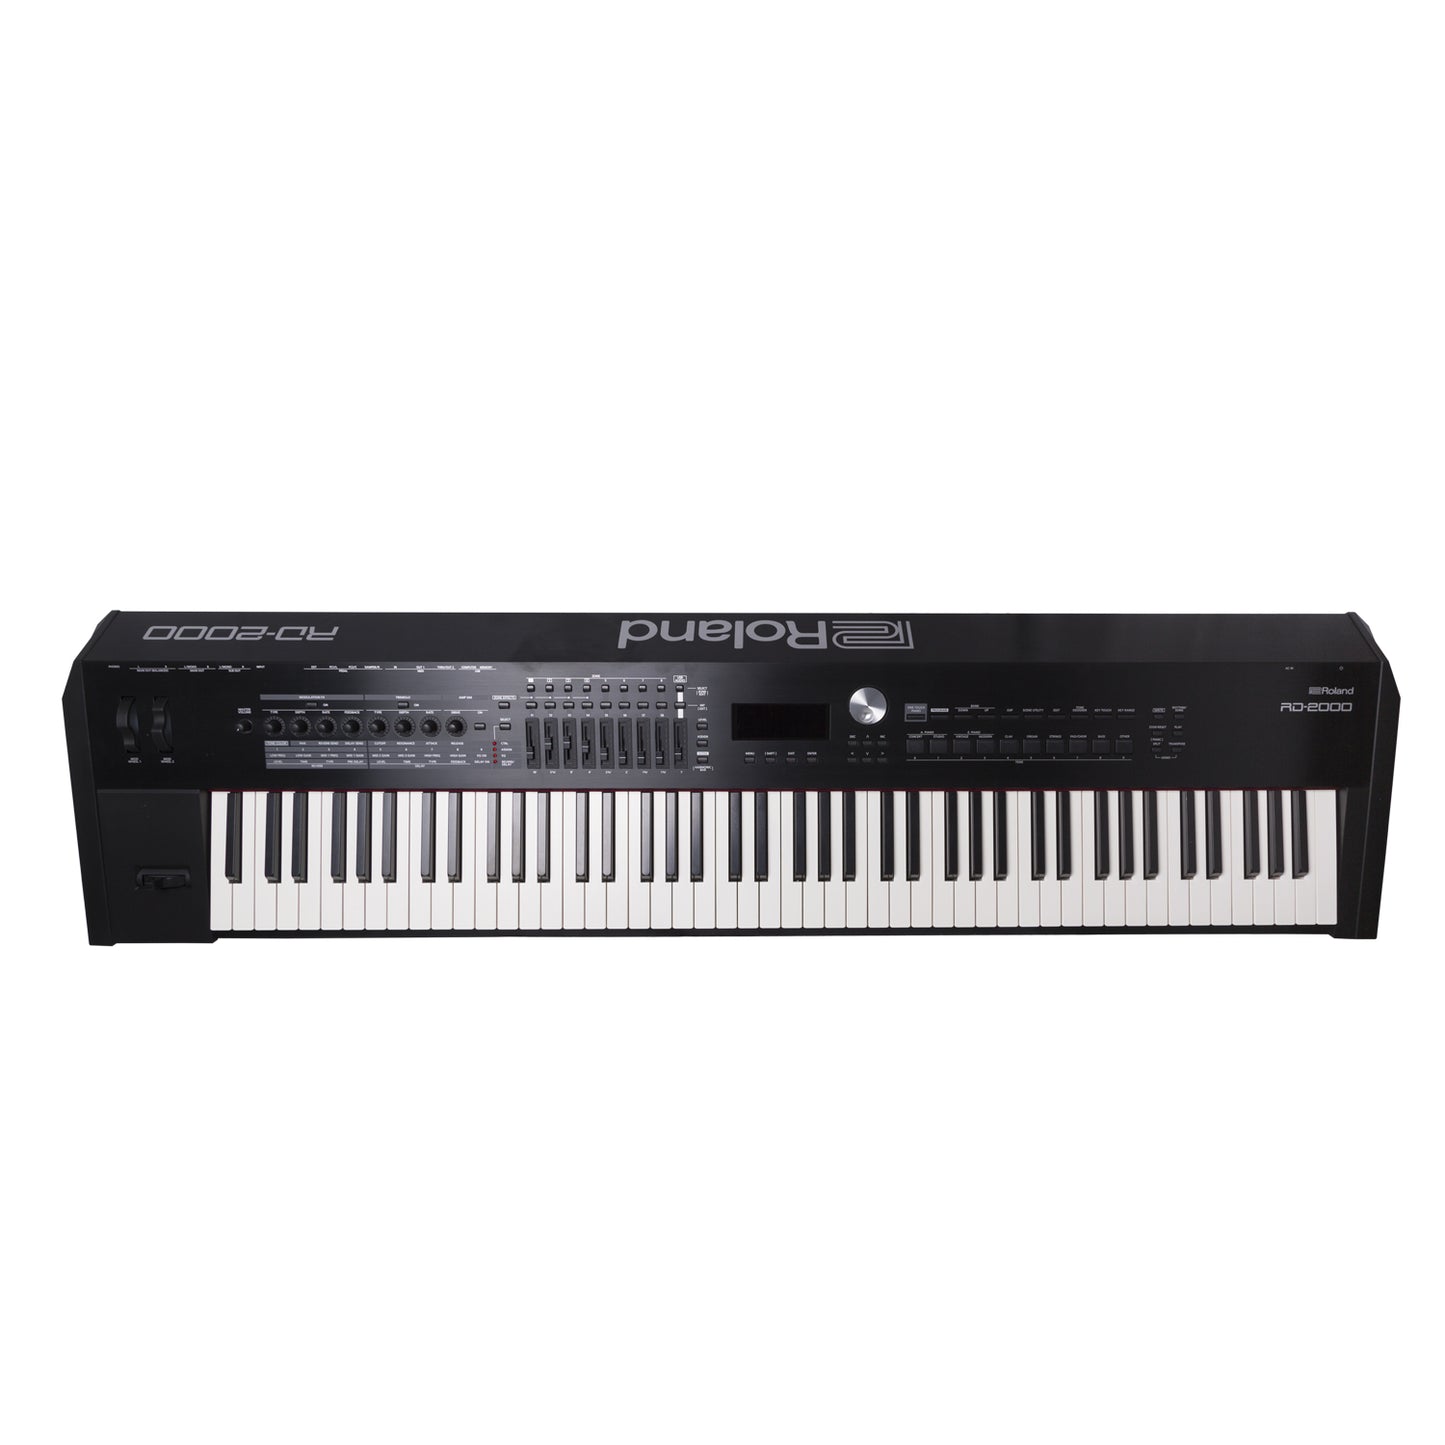 Roland RD-2000 Stage Piano